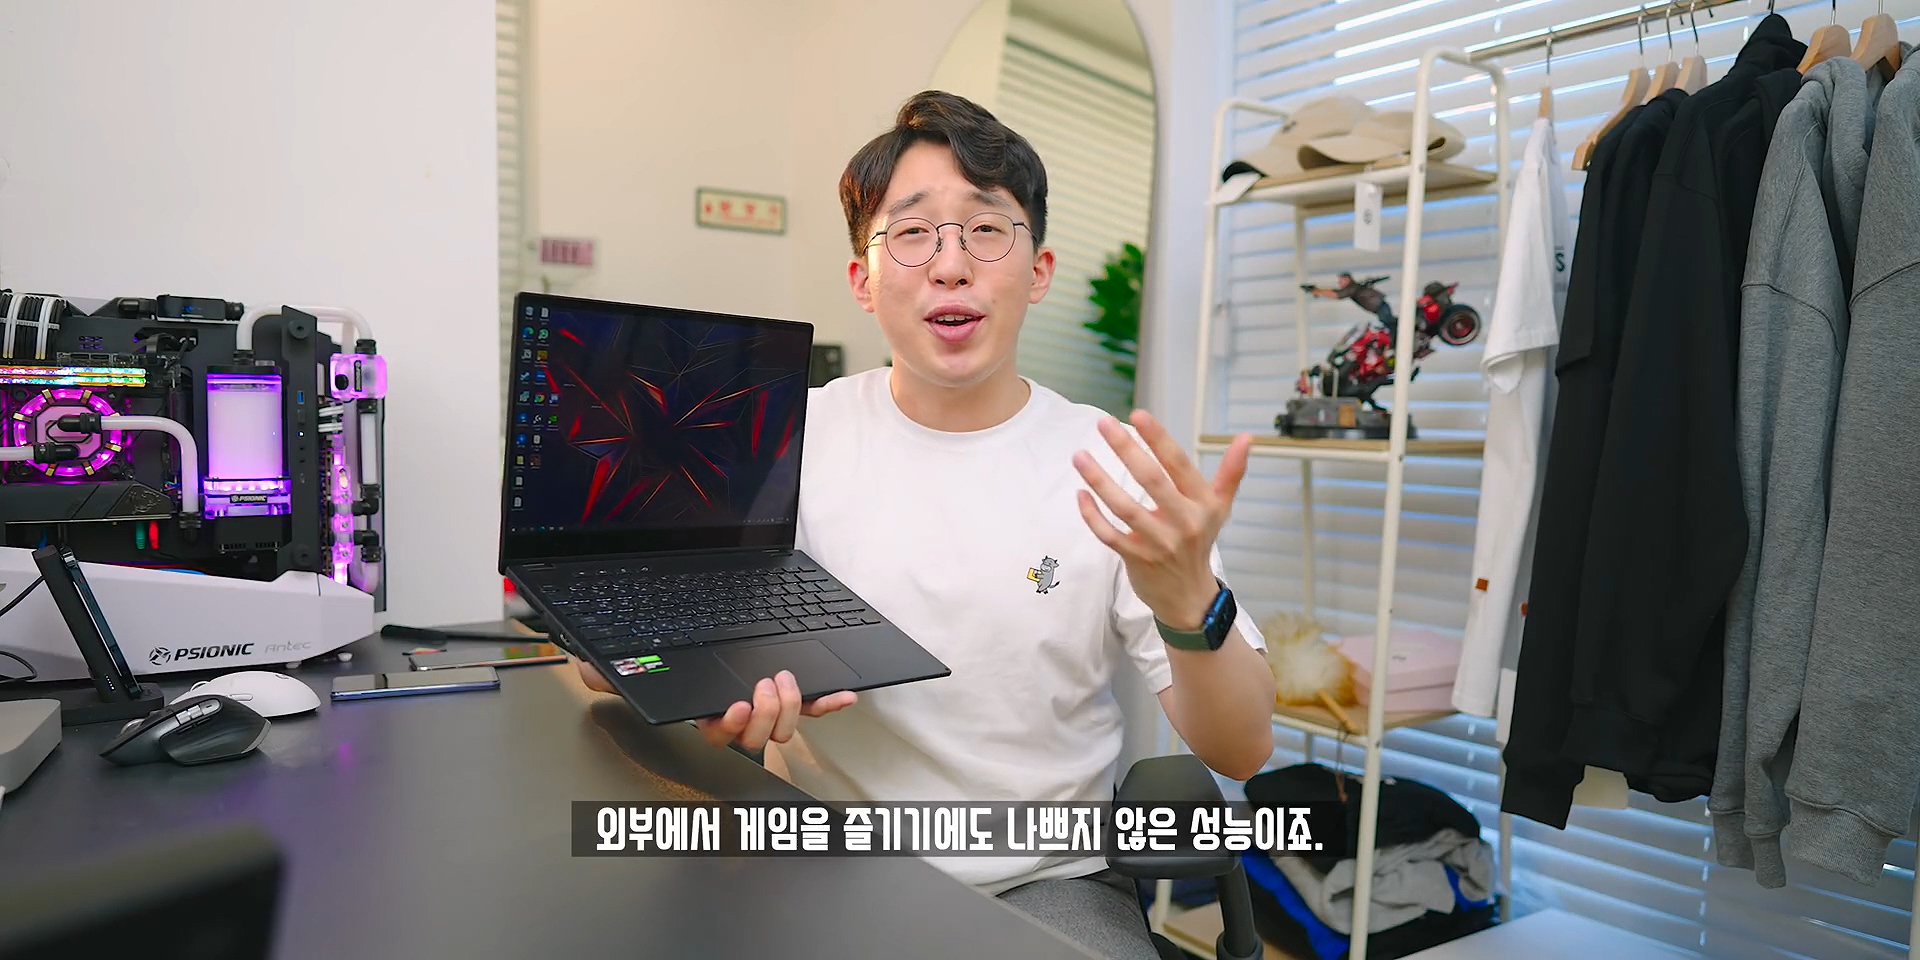 Laptops are a hot topic on YouTube these days.